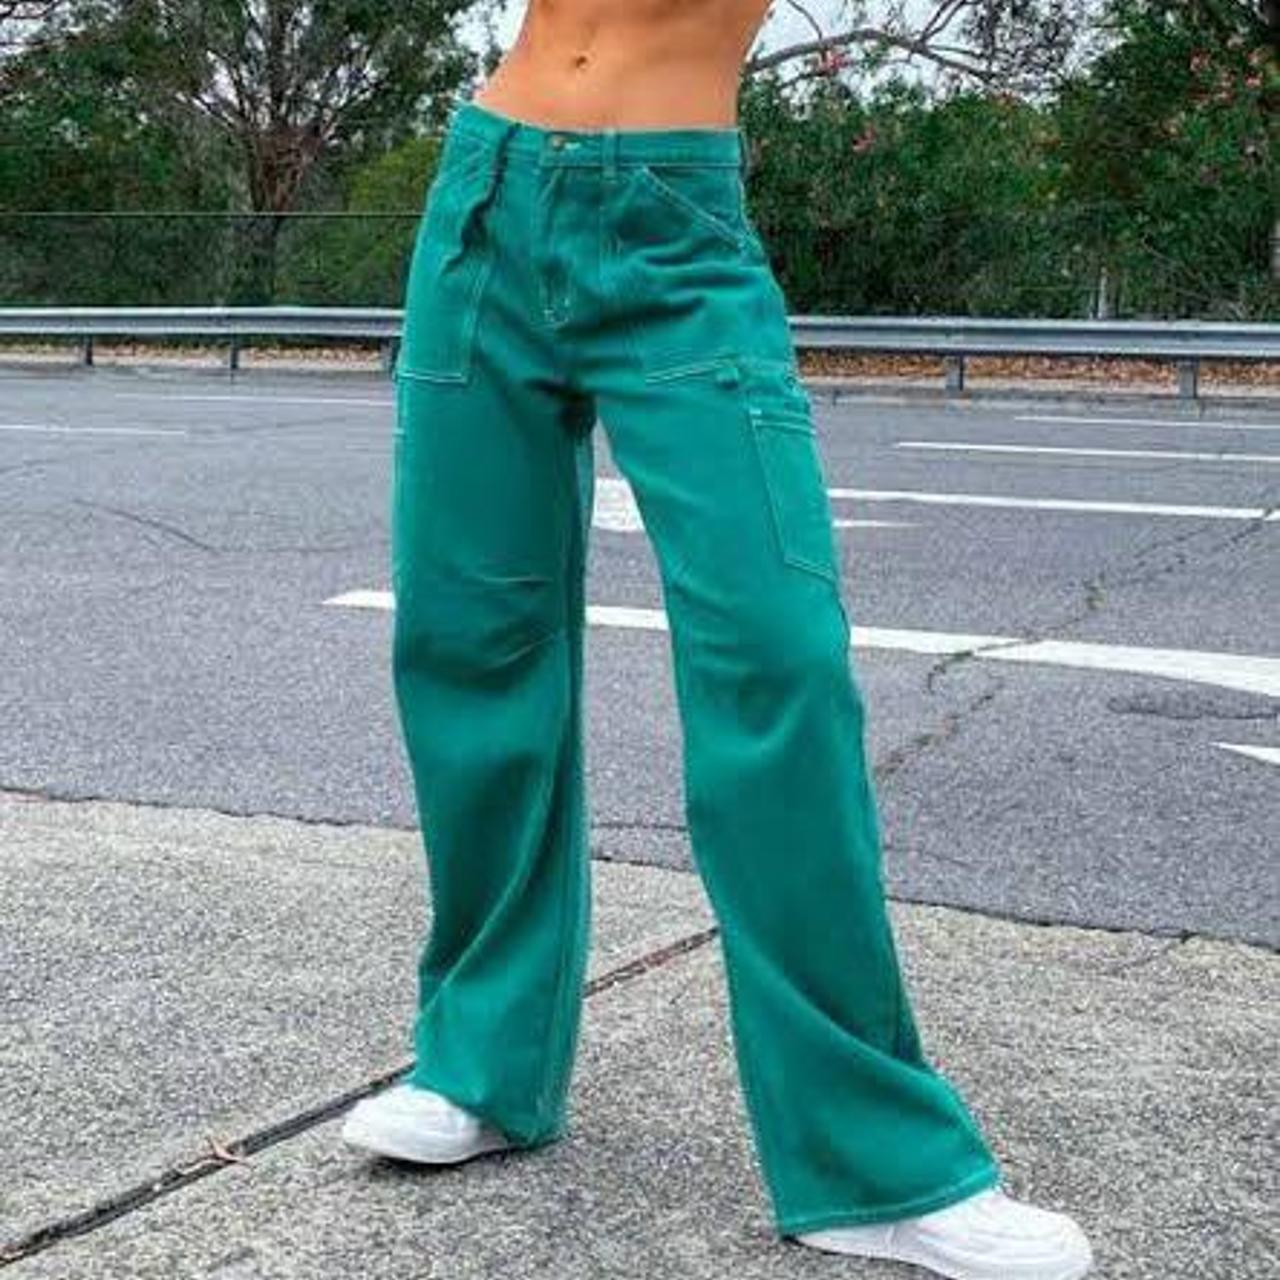 Lioness Green Miami Vice Pants 💚 worn 3 or 4 times... - Depop